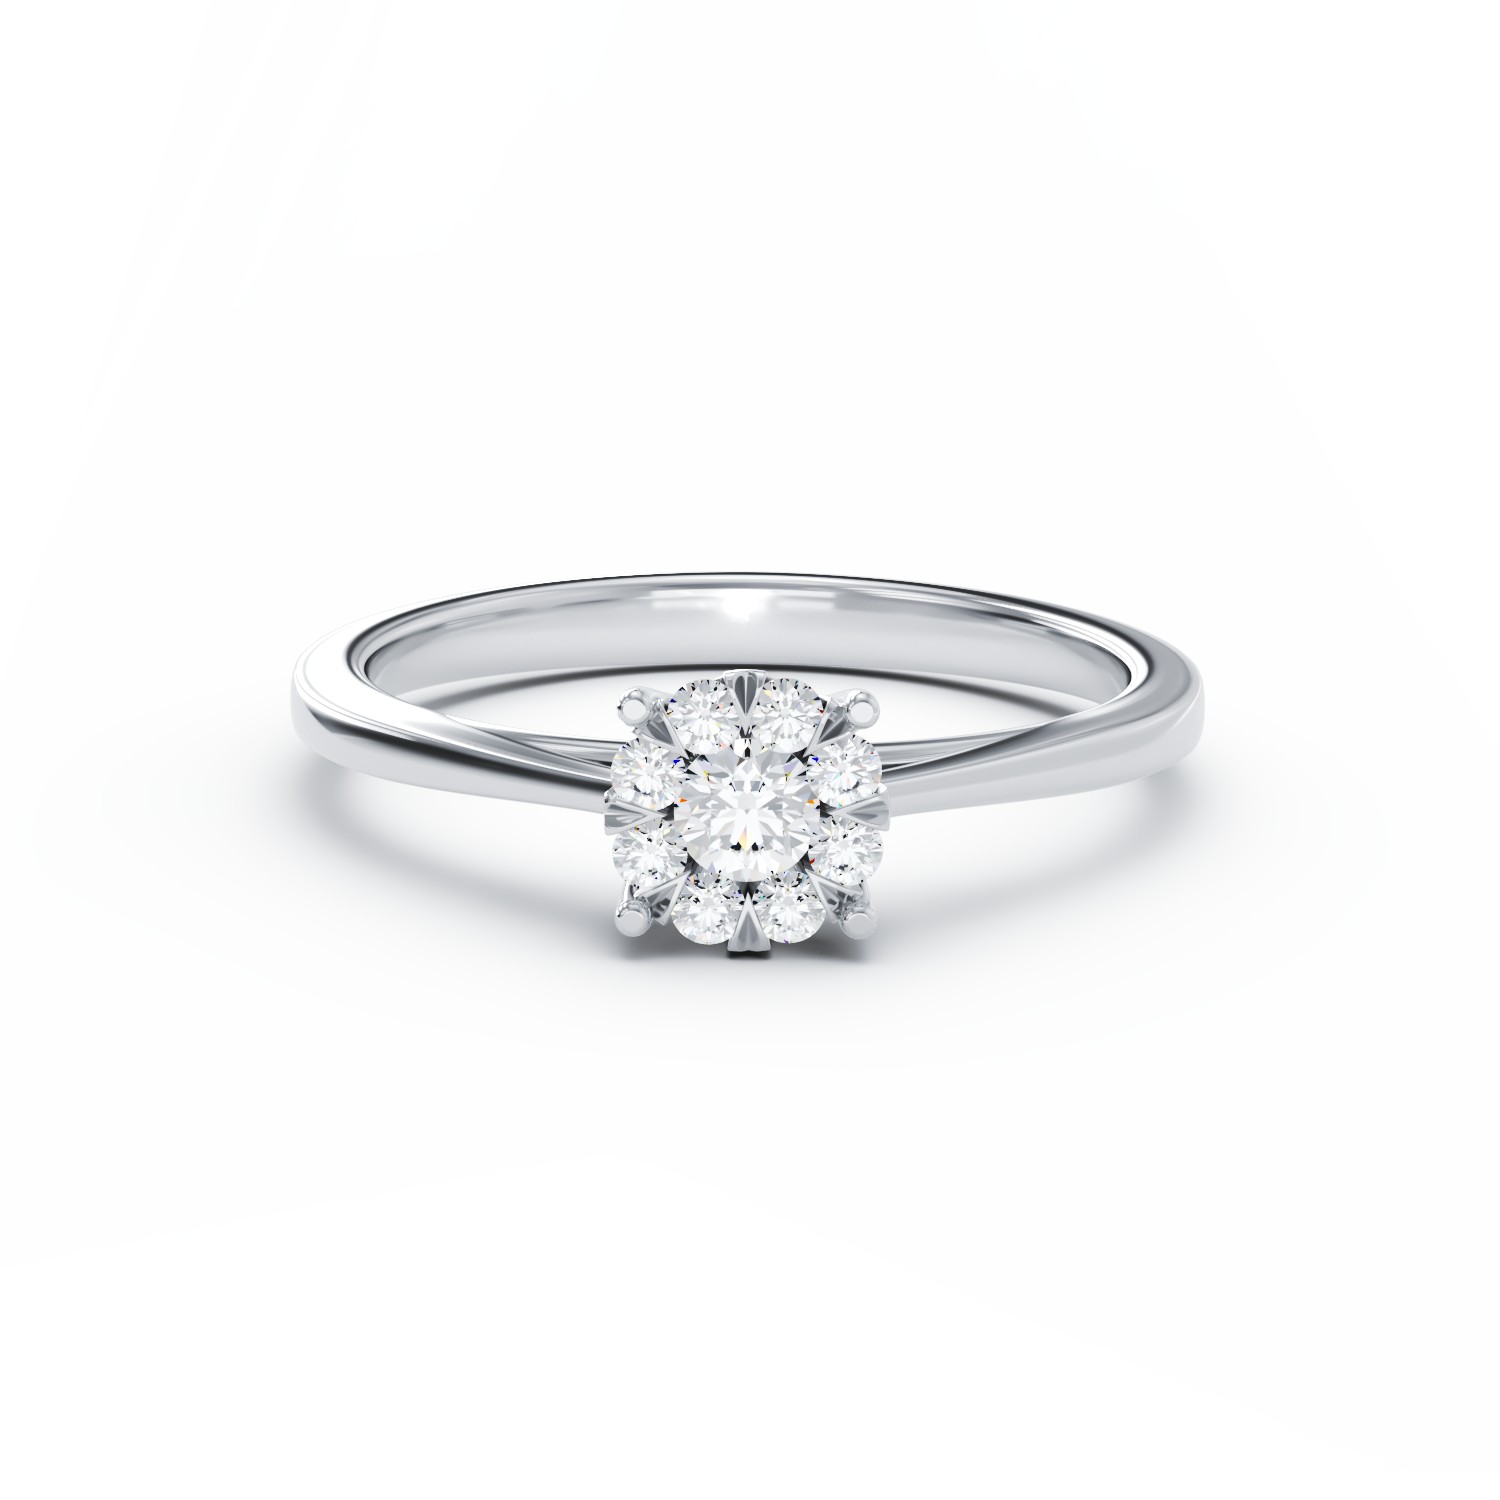 18K white gold engagement ring with diamonds of 0.15ct